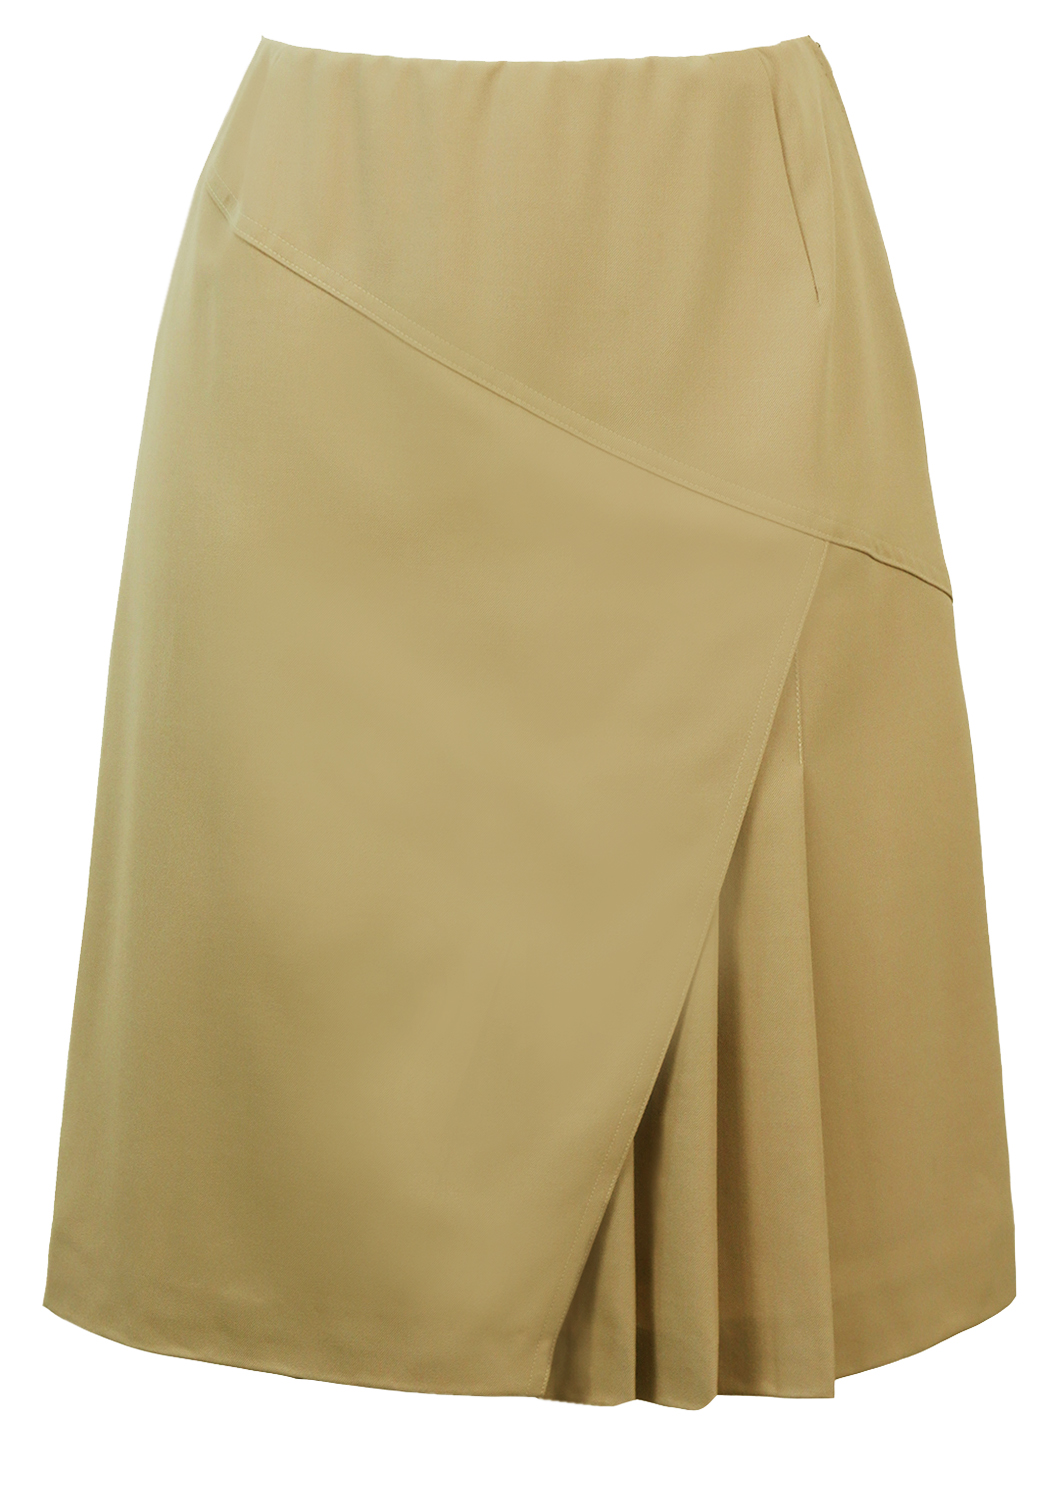 Vintage 1960's Knee Length Taupe Skirt with Asymmetric Pleat Design - S ...